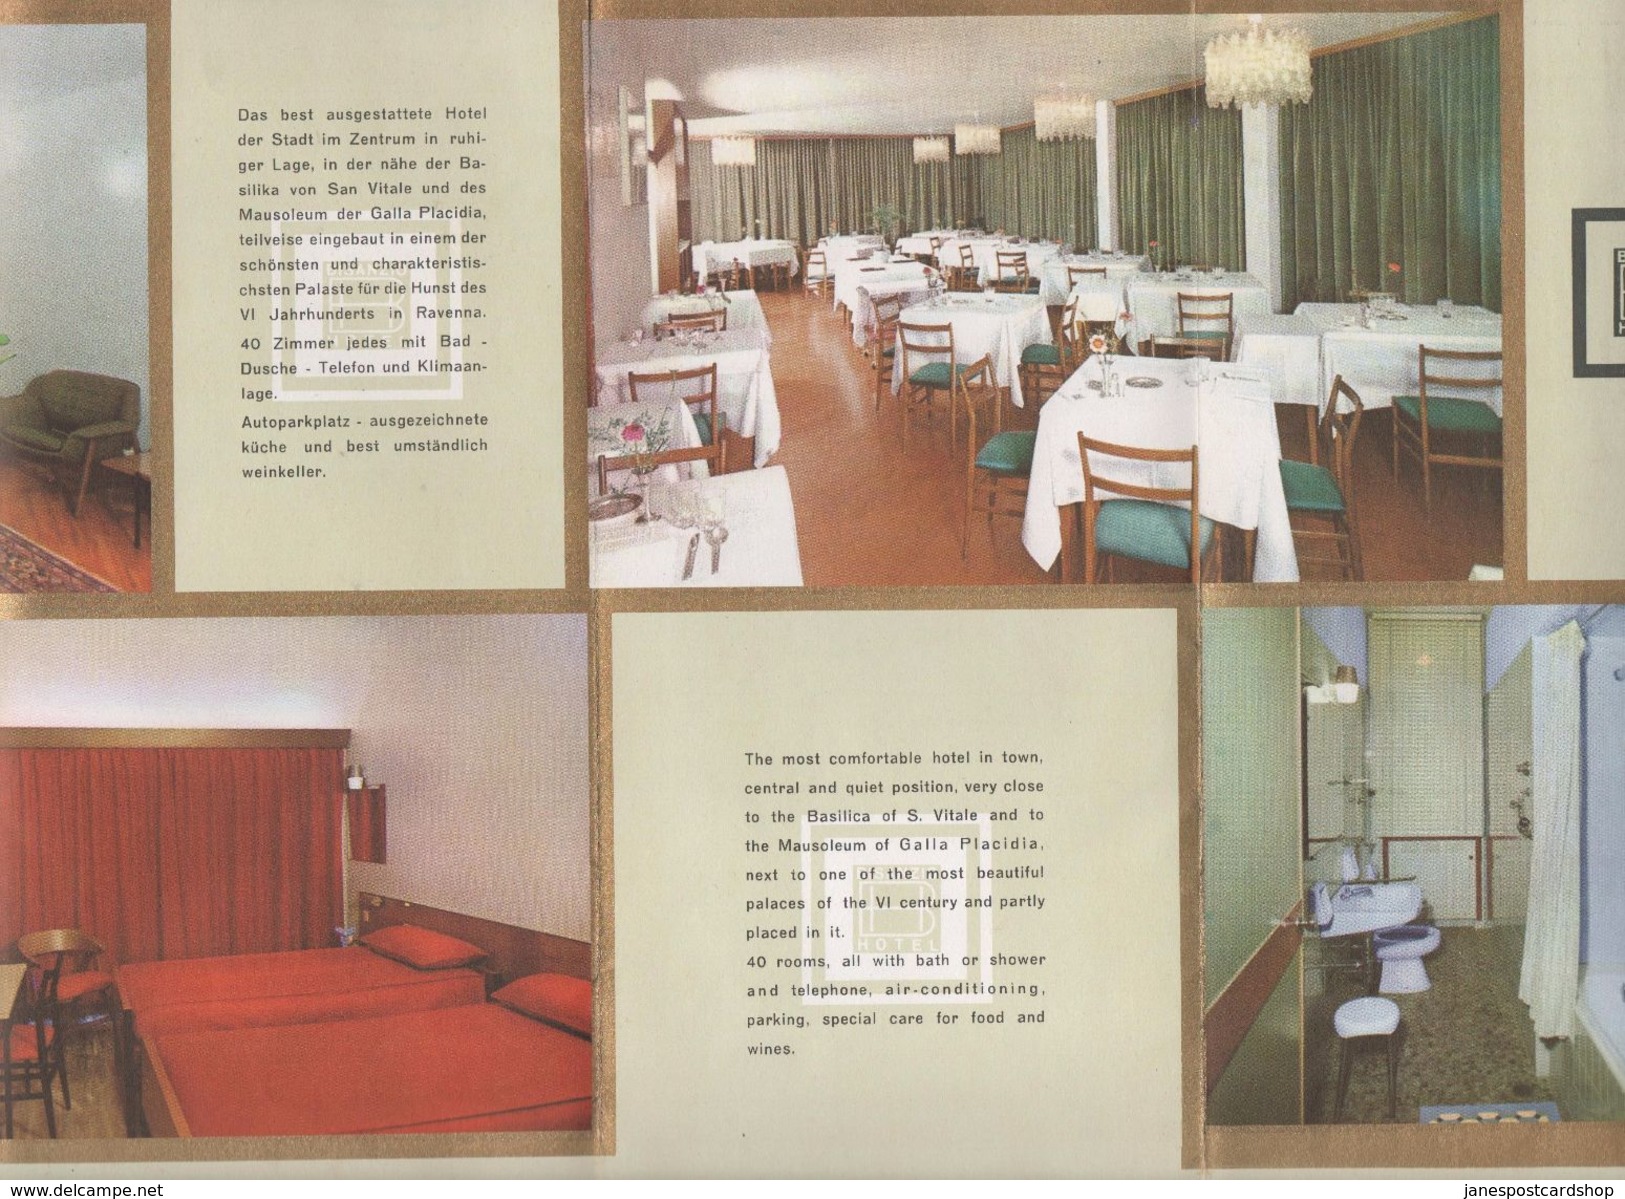 HOTEL BISANZIO - RAVENNA - ITALY - Showing Hotel Interior With Mid Century Furniture - Guess 1950's/1960's - Tourism Brochures